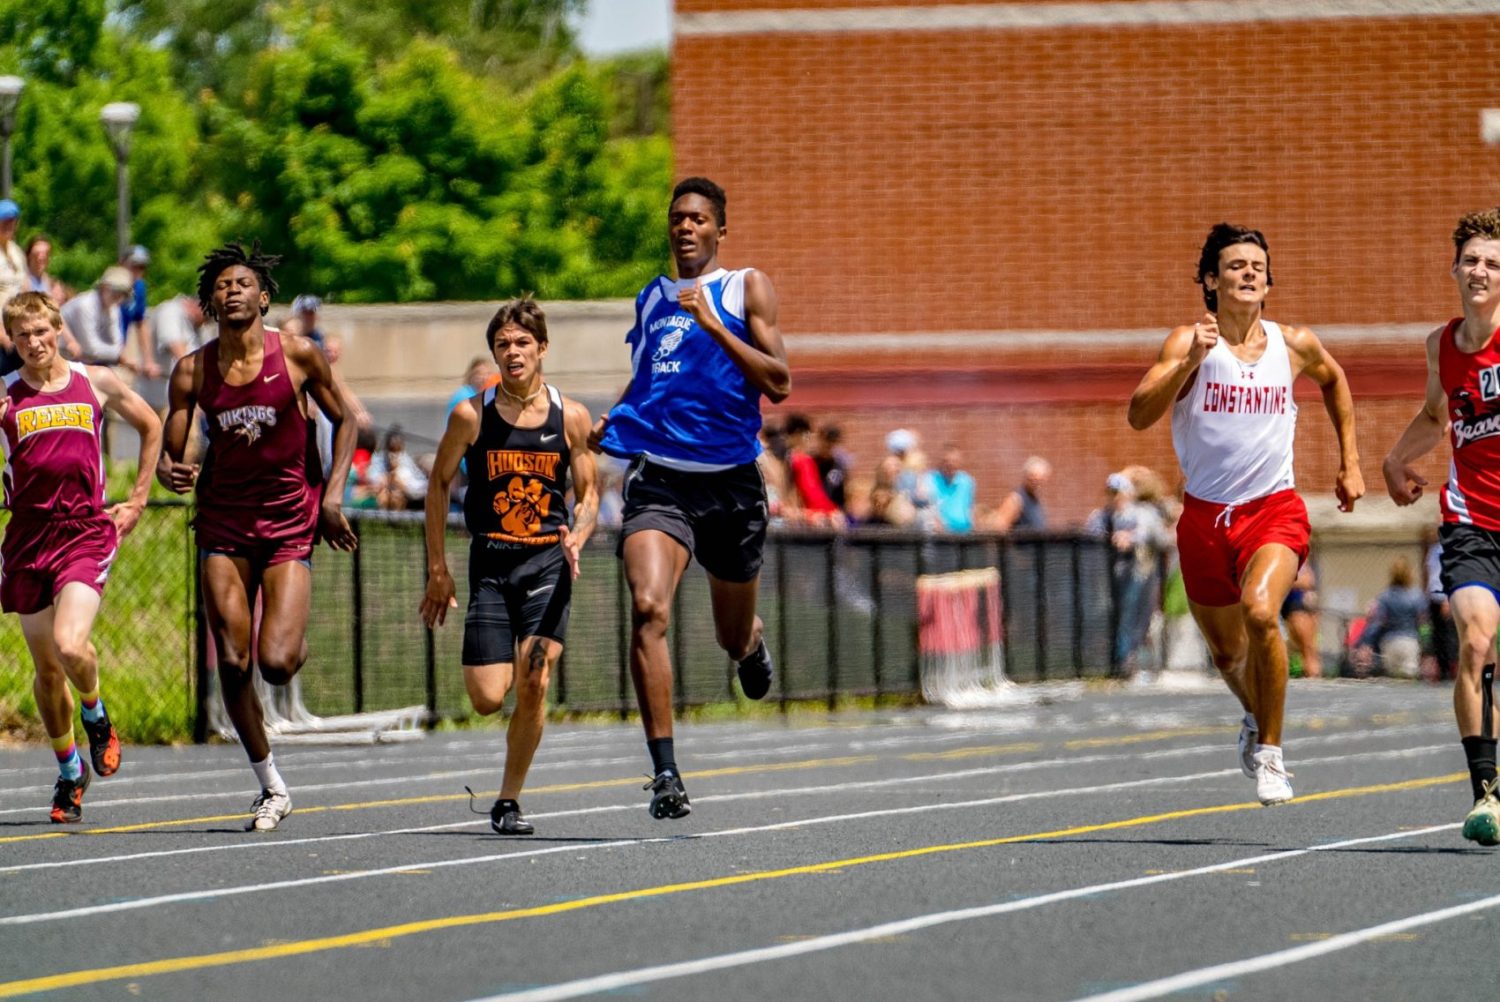 Hart, Mason County Central earn Top 10 spots in Division 3 boys track state meet